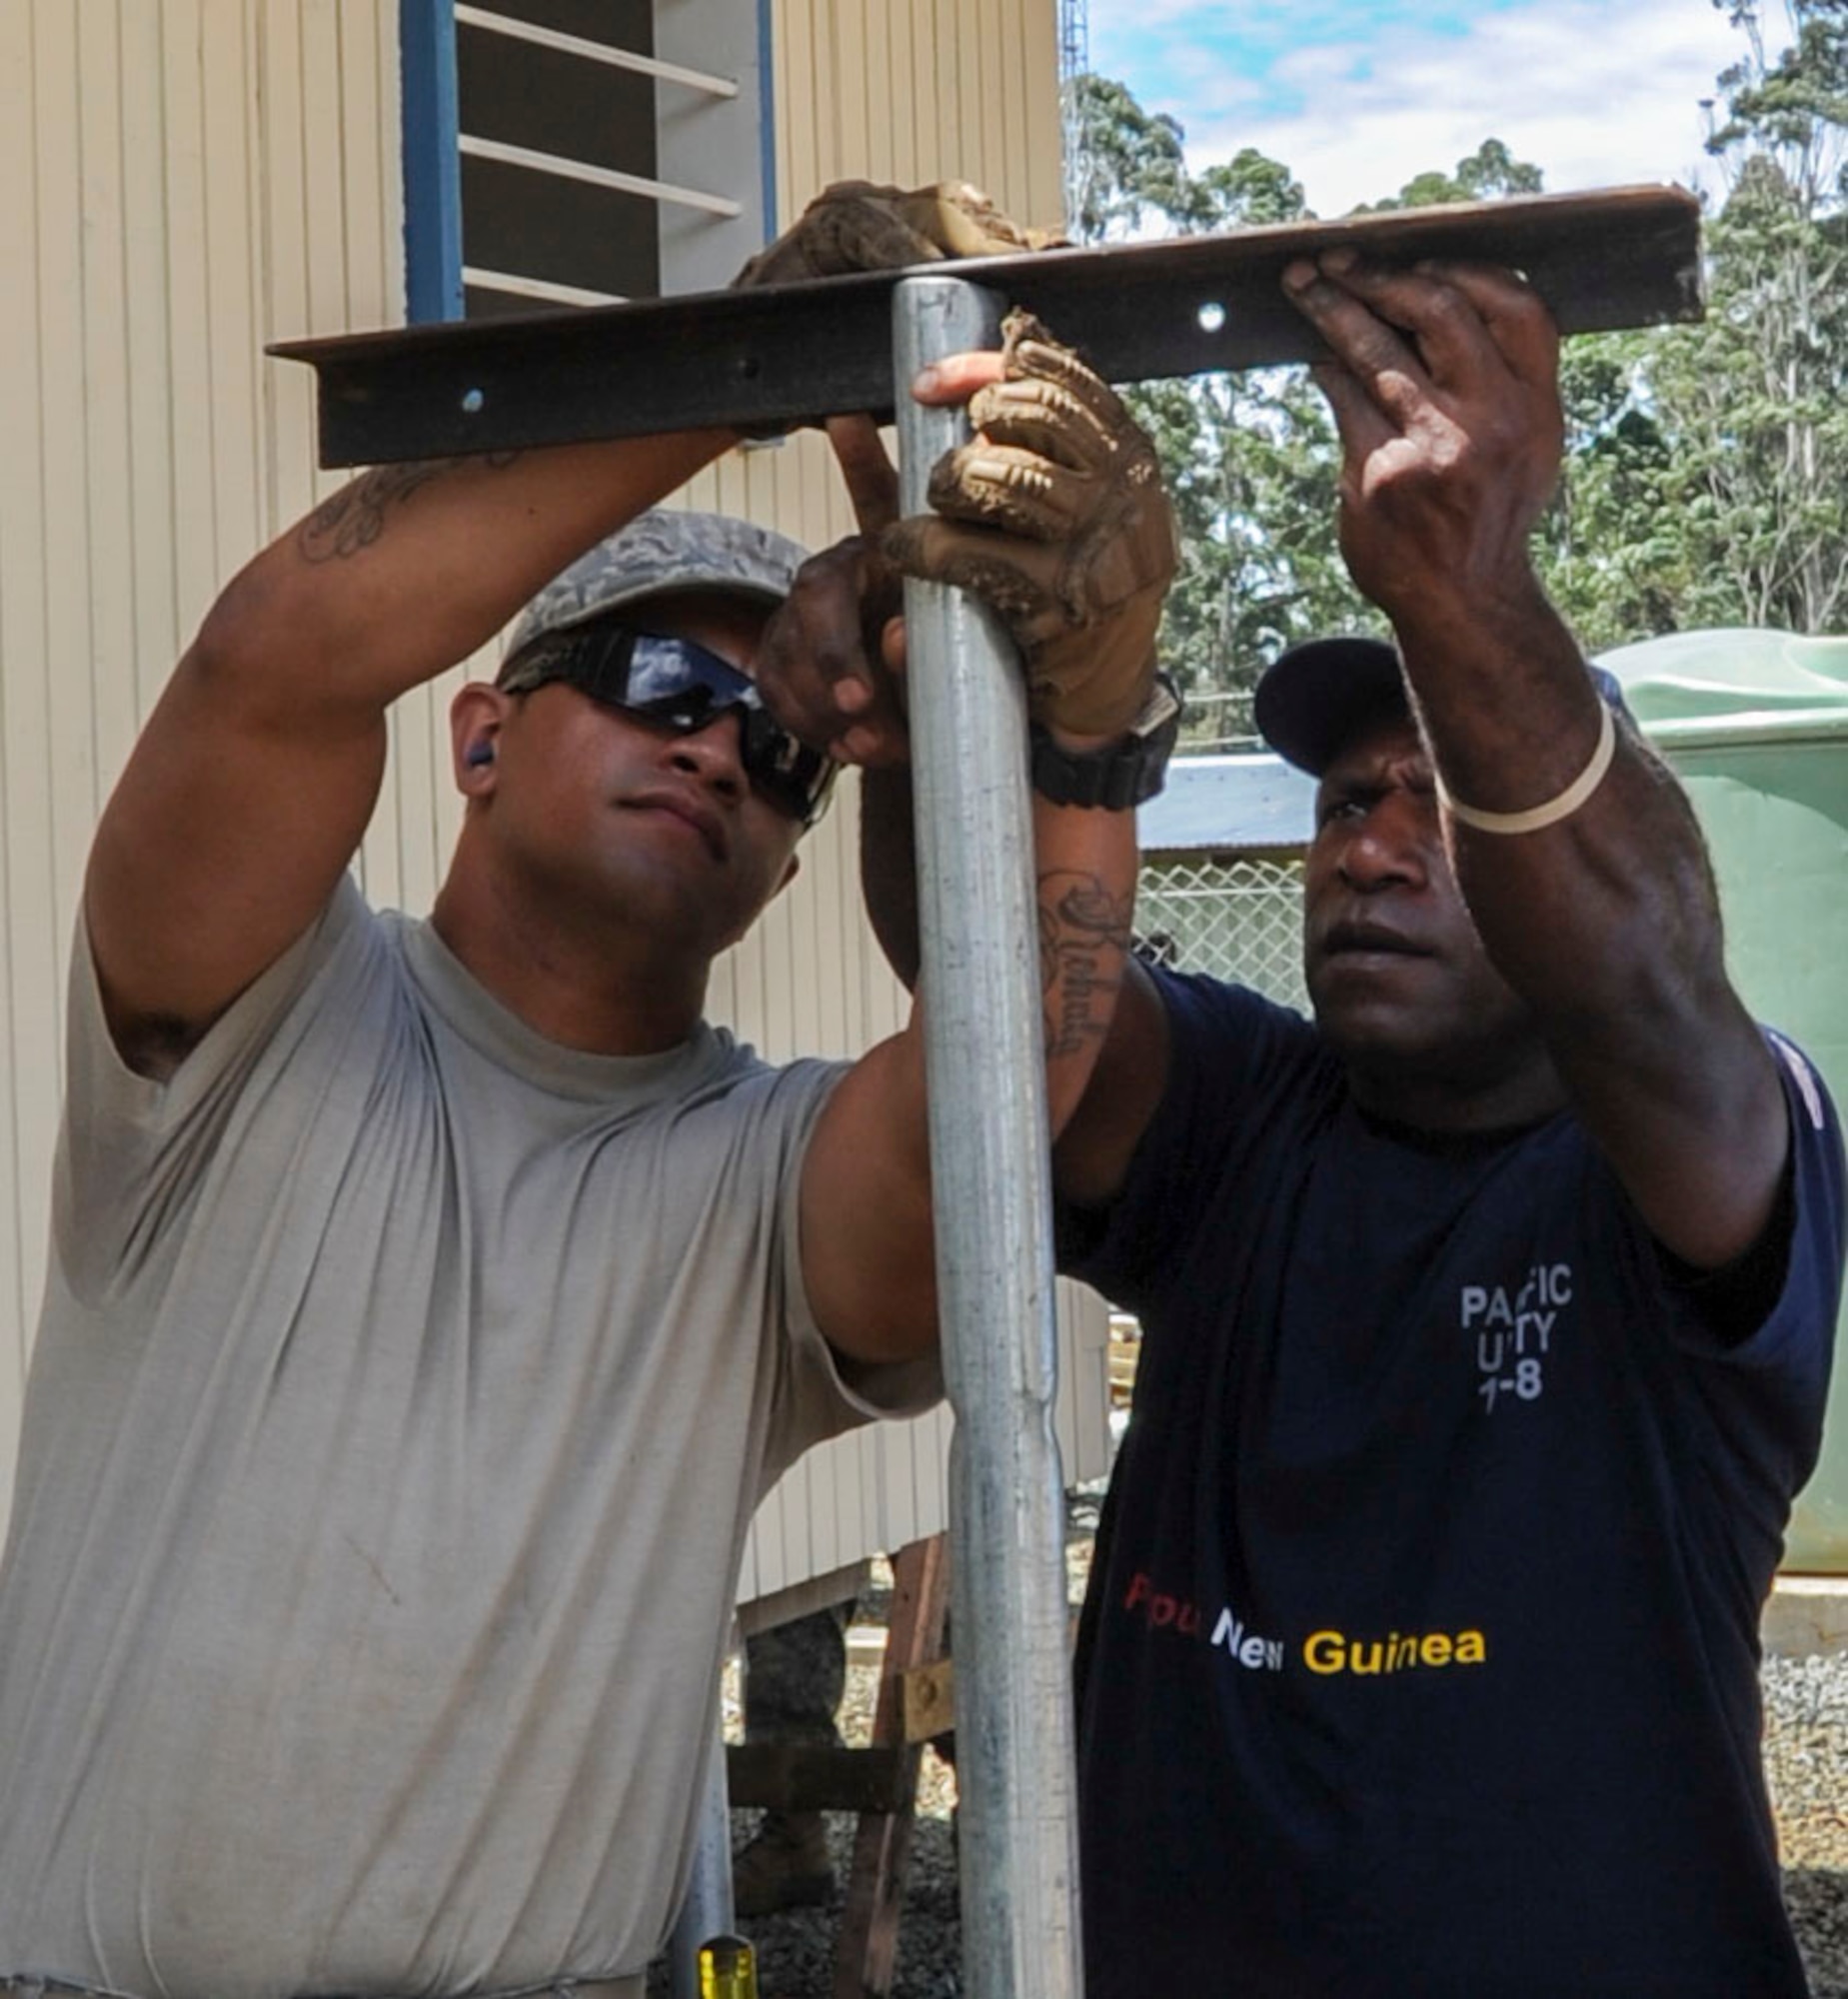 Senior Airman Malcolm Yin, 154th CES emergency management journeyman, twists a screw while Petrus Buka, a day laborer from the local community, holds a pole in place at Togoba Secondary School in Mount Hagen, Papua New Guinea, Sept. 8, 2014. Yin and Buka are constructing a clothesline, which will be used by residents of the newly constructed female dormitories, as part of Pacific Unity 14-8. Pacific Unity helps cultivate common bonds and foster goodwill between the U.S. and regional nations through multilateral humanitarian assistance and civil military operations. (U.S. Air Force photo by Tech. Sgt. Terri Paden/Released)